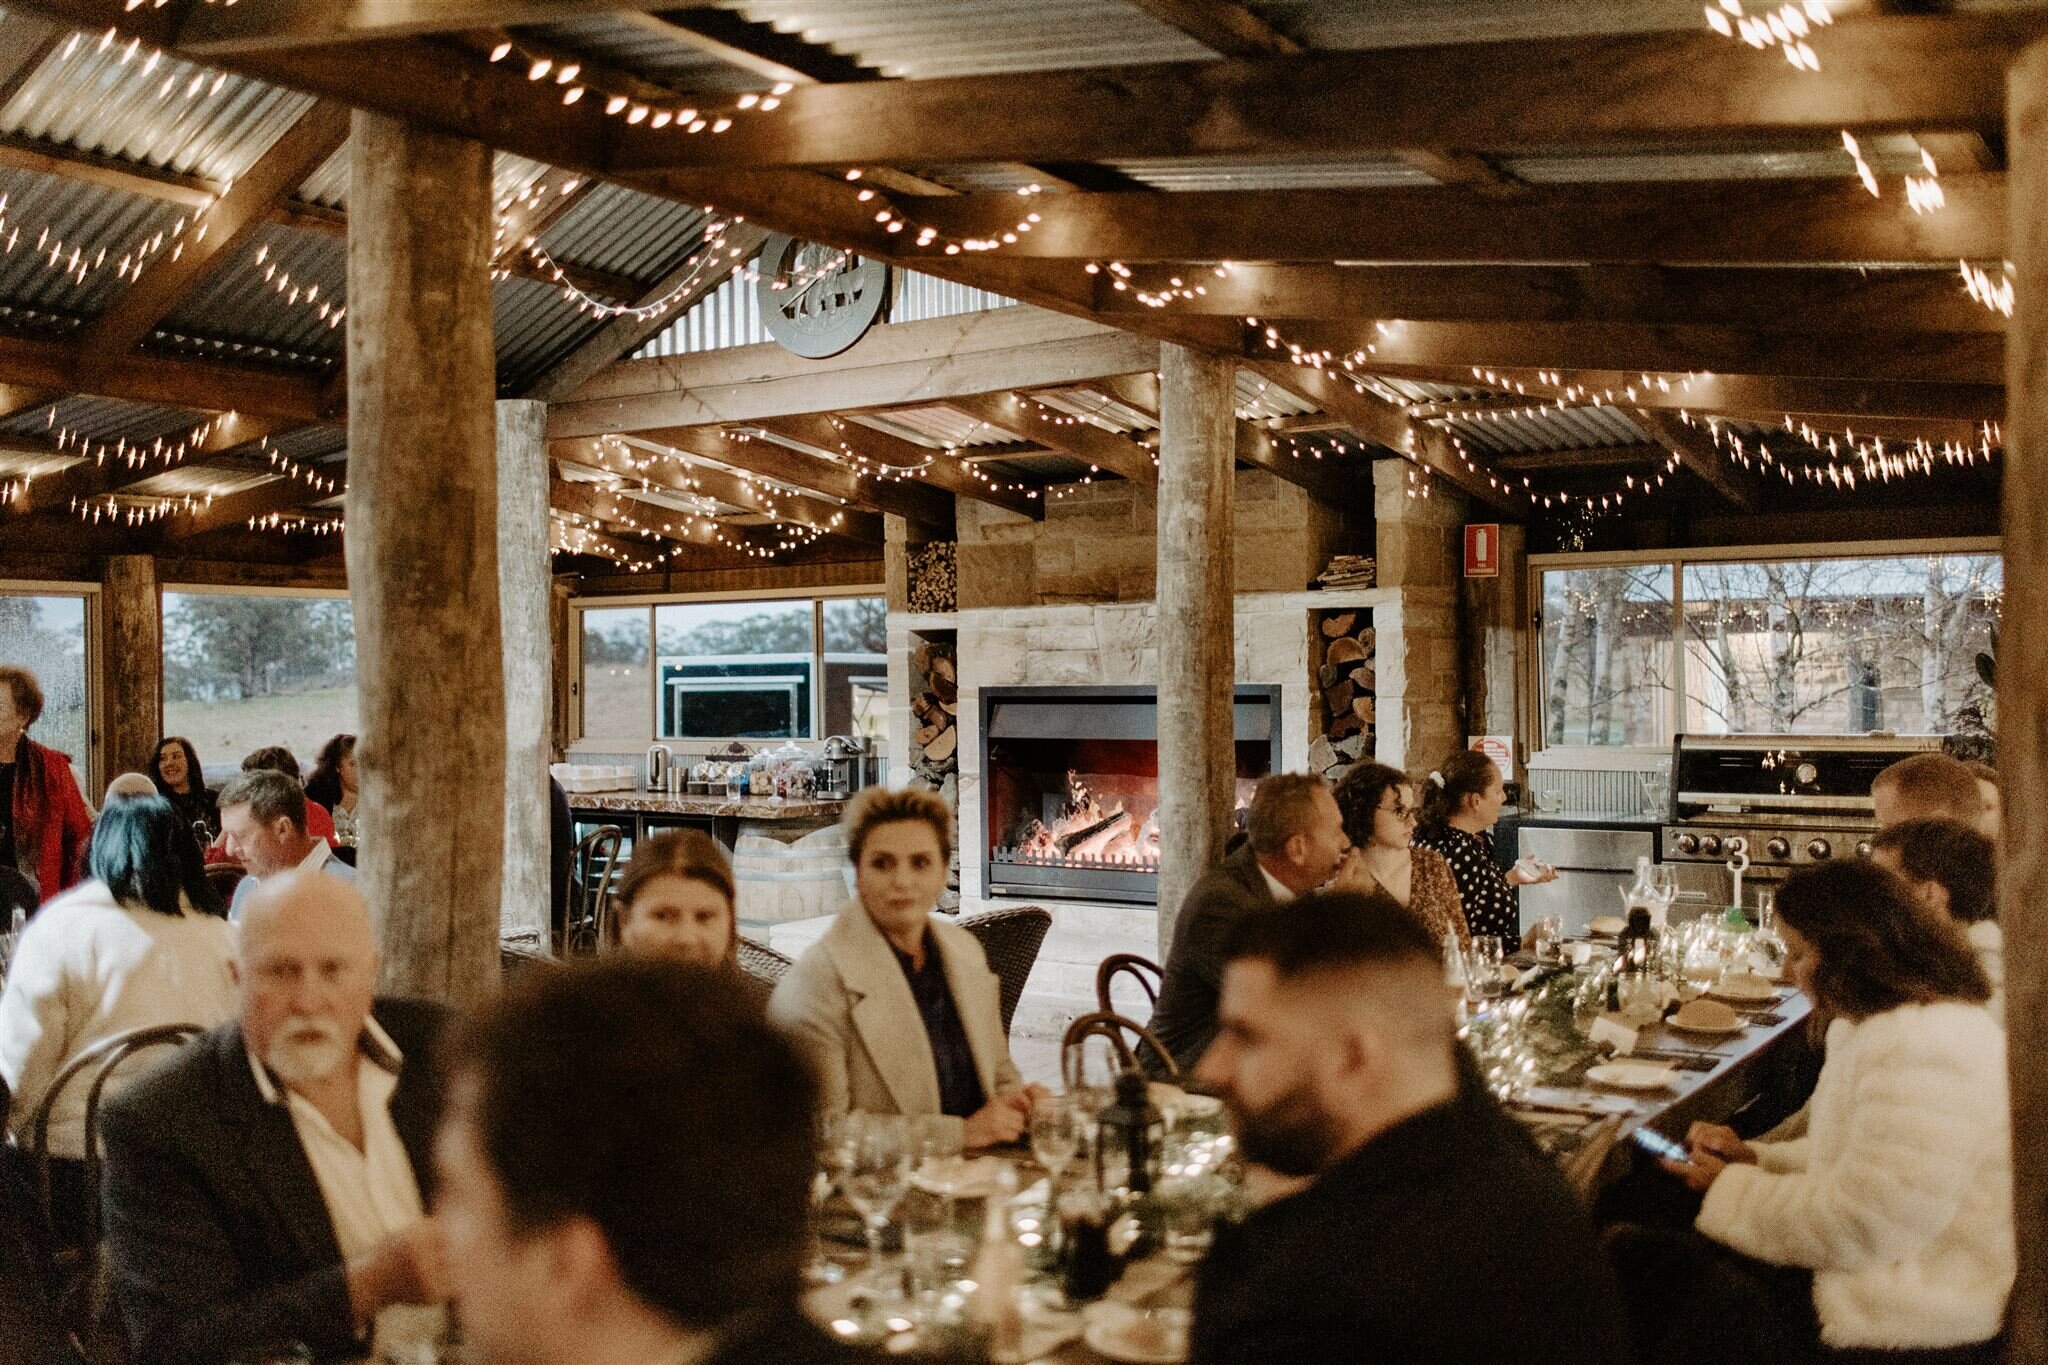 Our Barn can seat up to 100 guests and with the fireplace roaring and fairy lights twinkling, it is the perfect romantic scene for your reception.
.
.
.
.
 #eventvenue #logfire #cosyvibes #woodfire #rusticwedding #farmweddings #barnvenue #sandstonefi